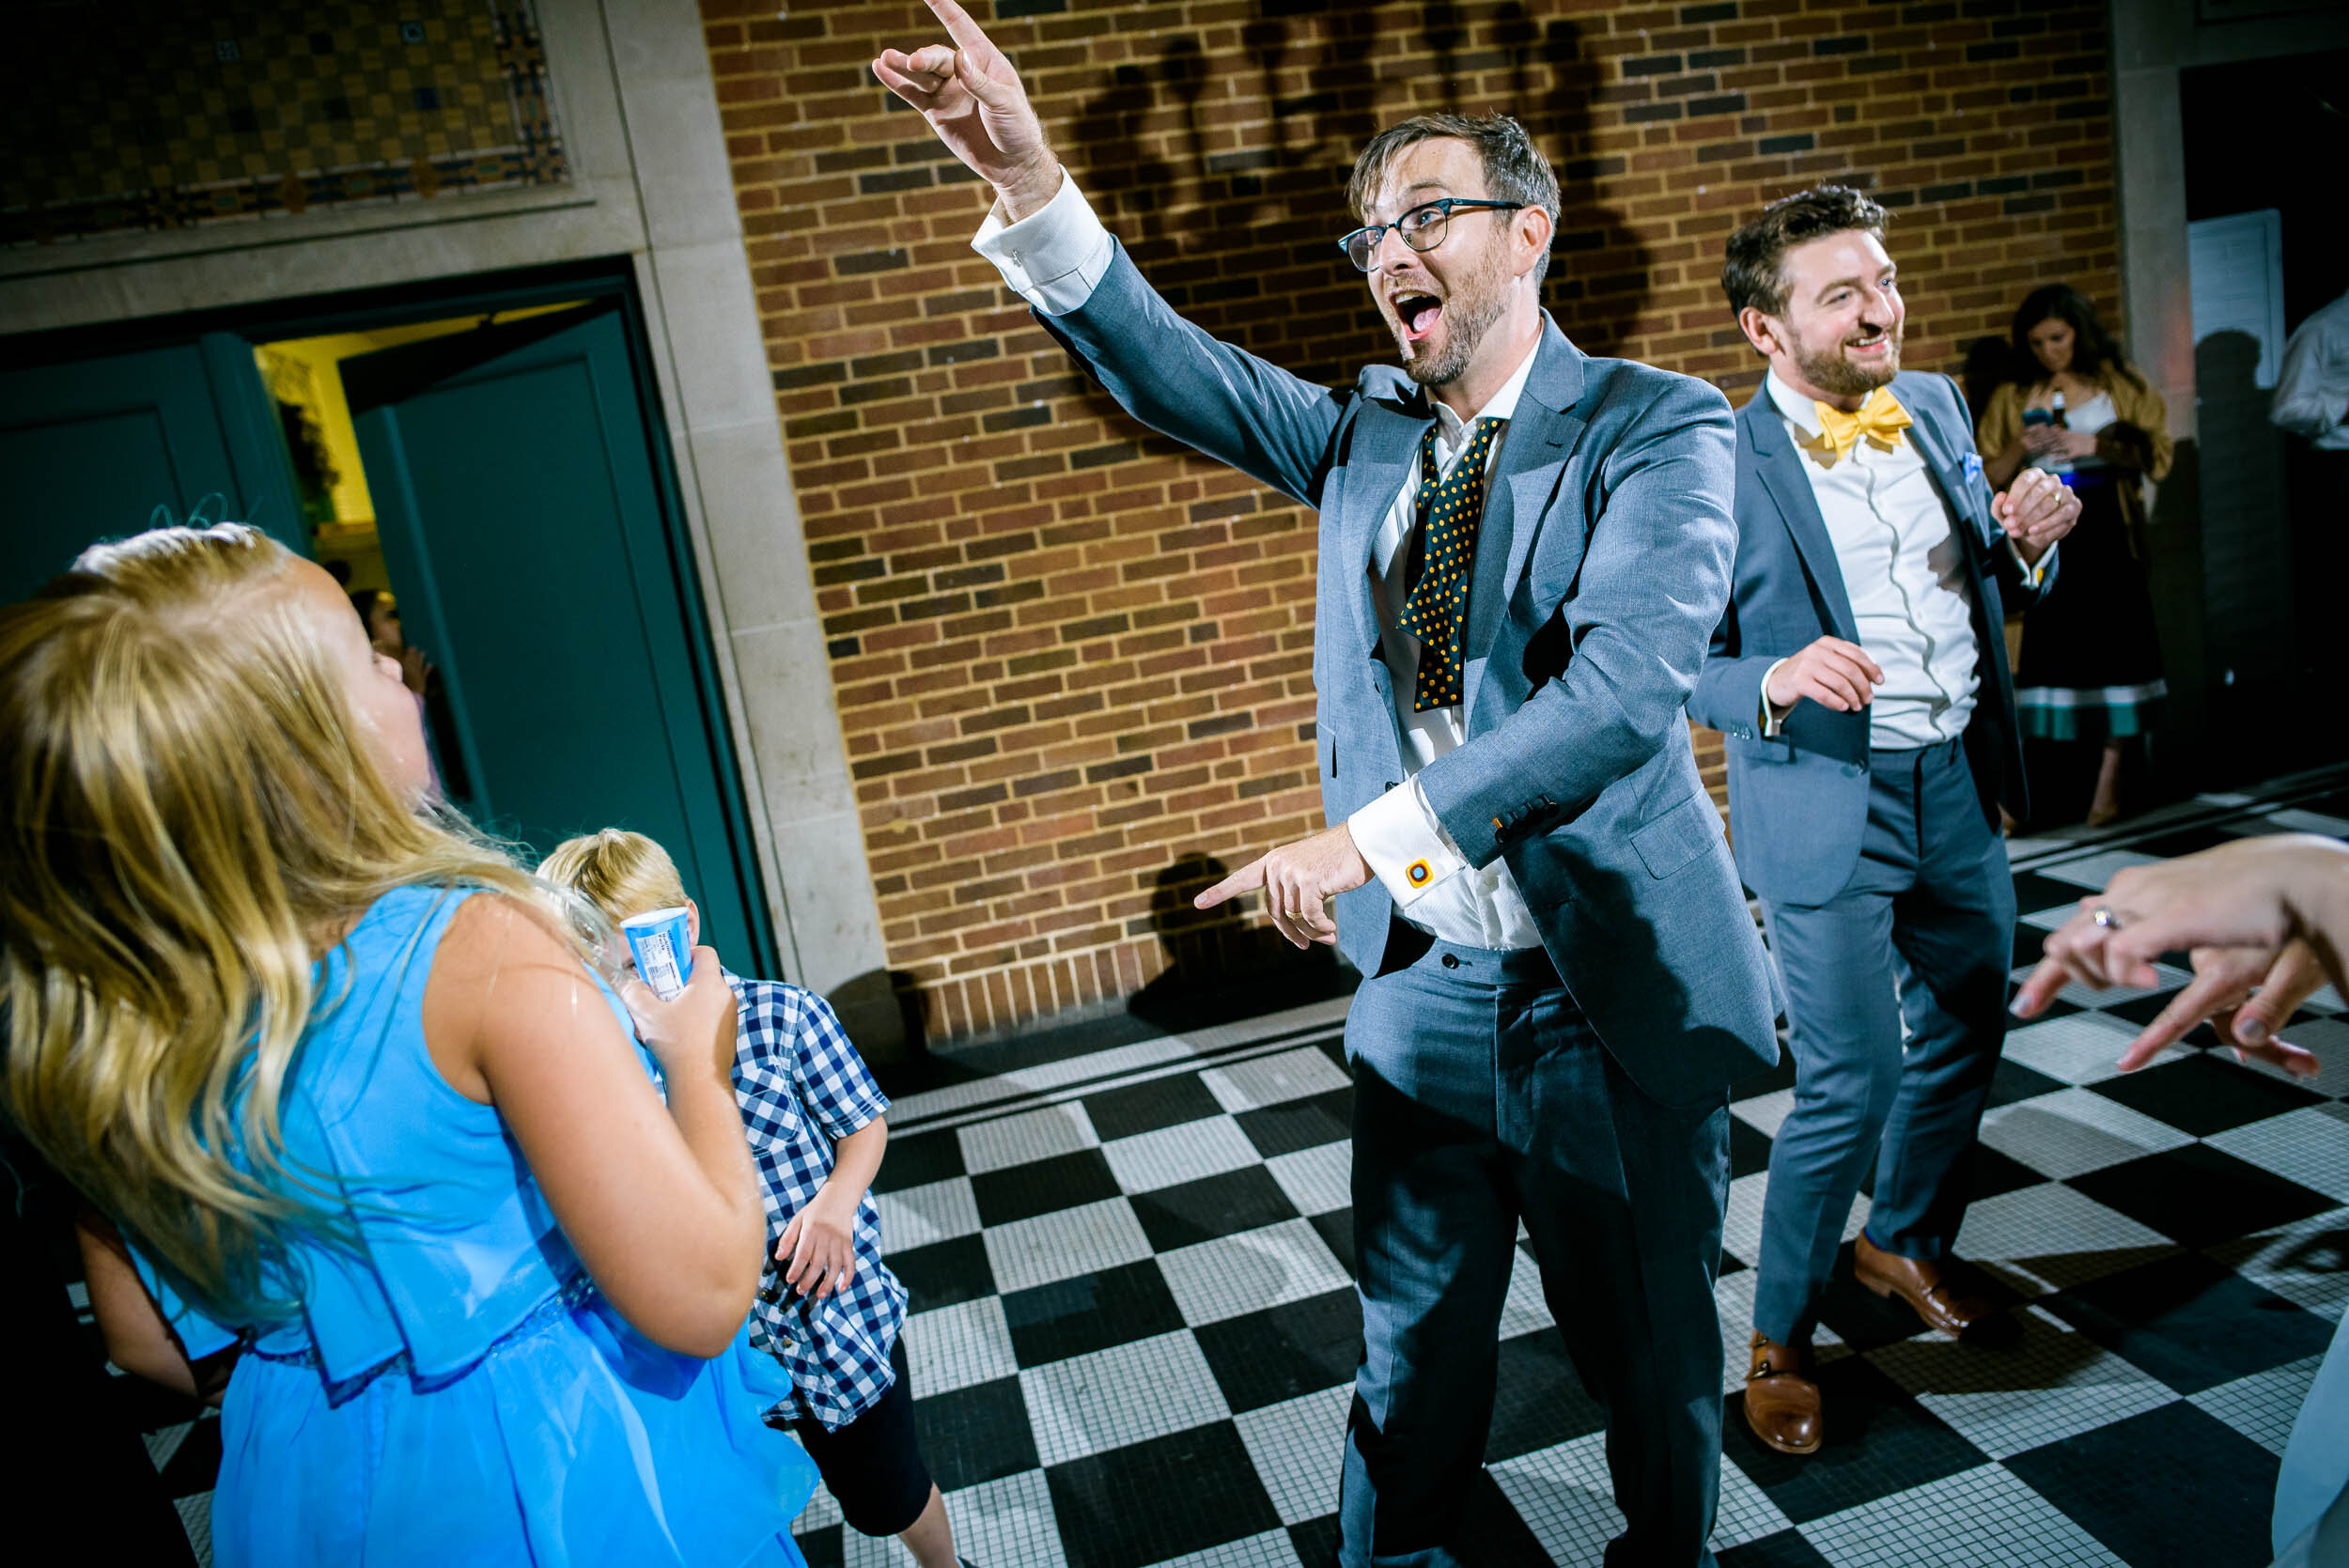 Groom on the dance floor during his reception: Columbus Park Refectory Chicago wedding captured by J. Brown Photography.